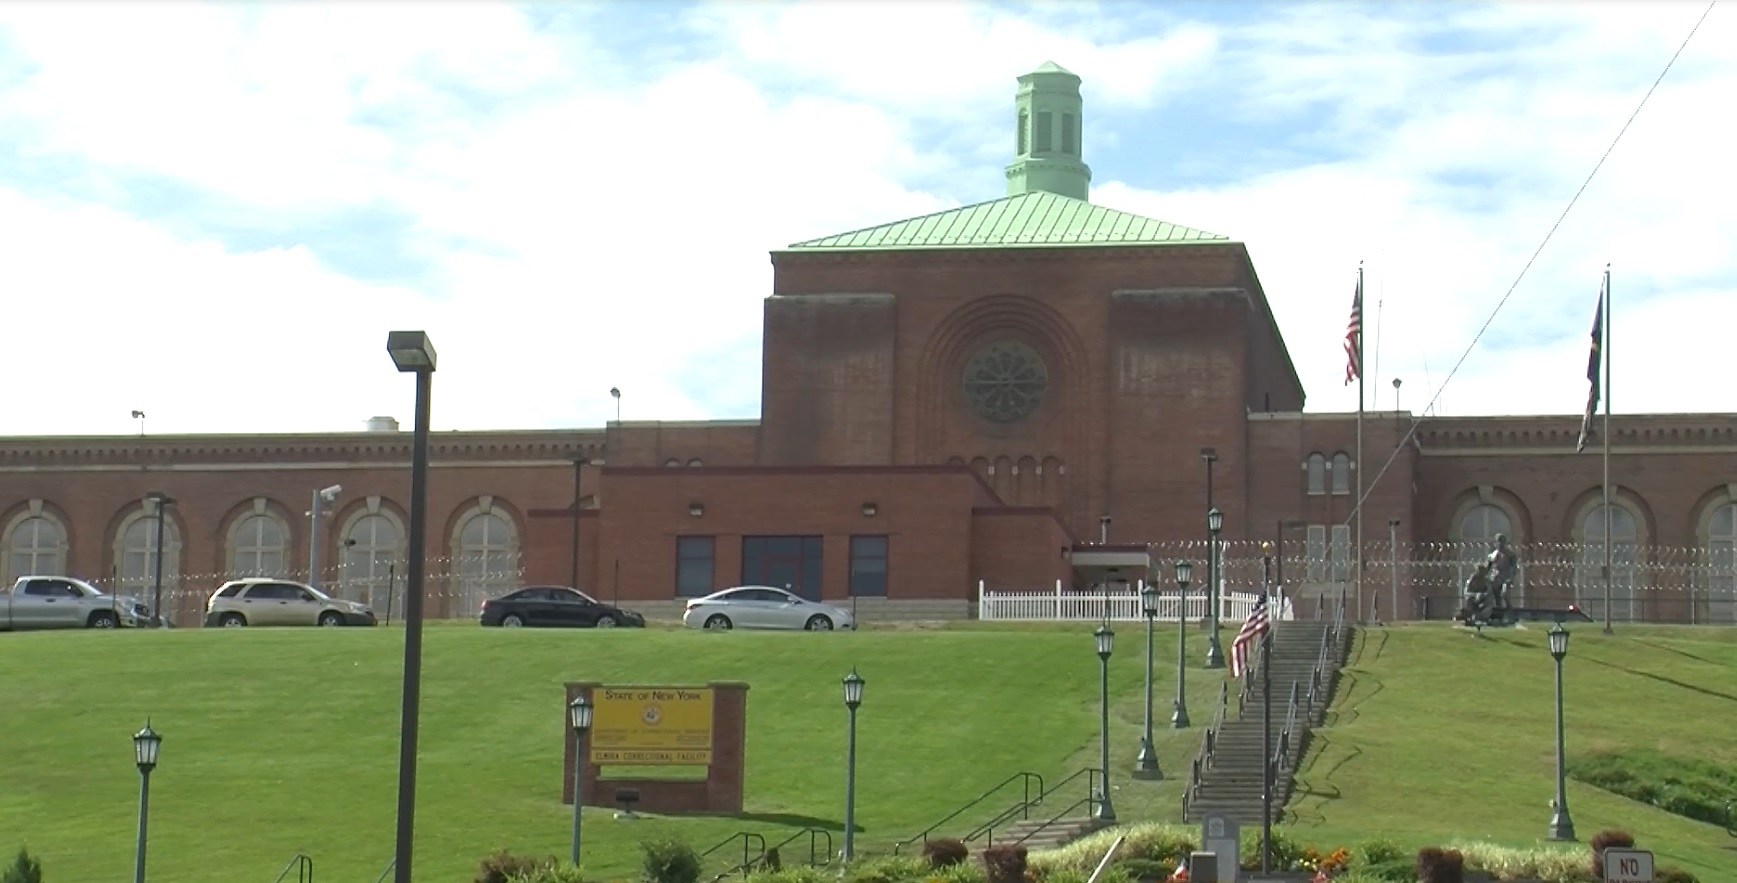 Suspected gang fights lock down parts of Elmira Correctional Facility